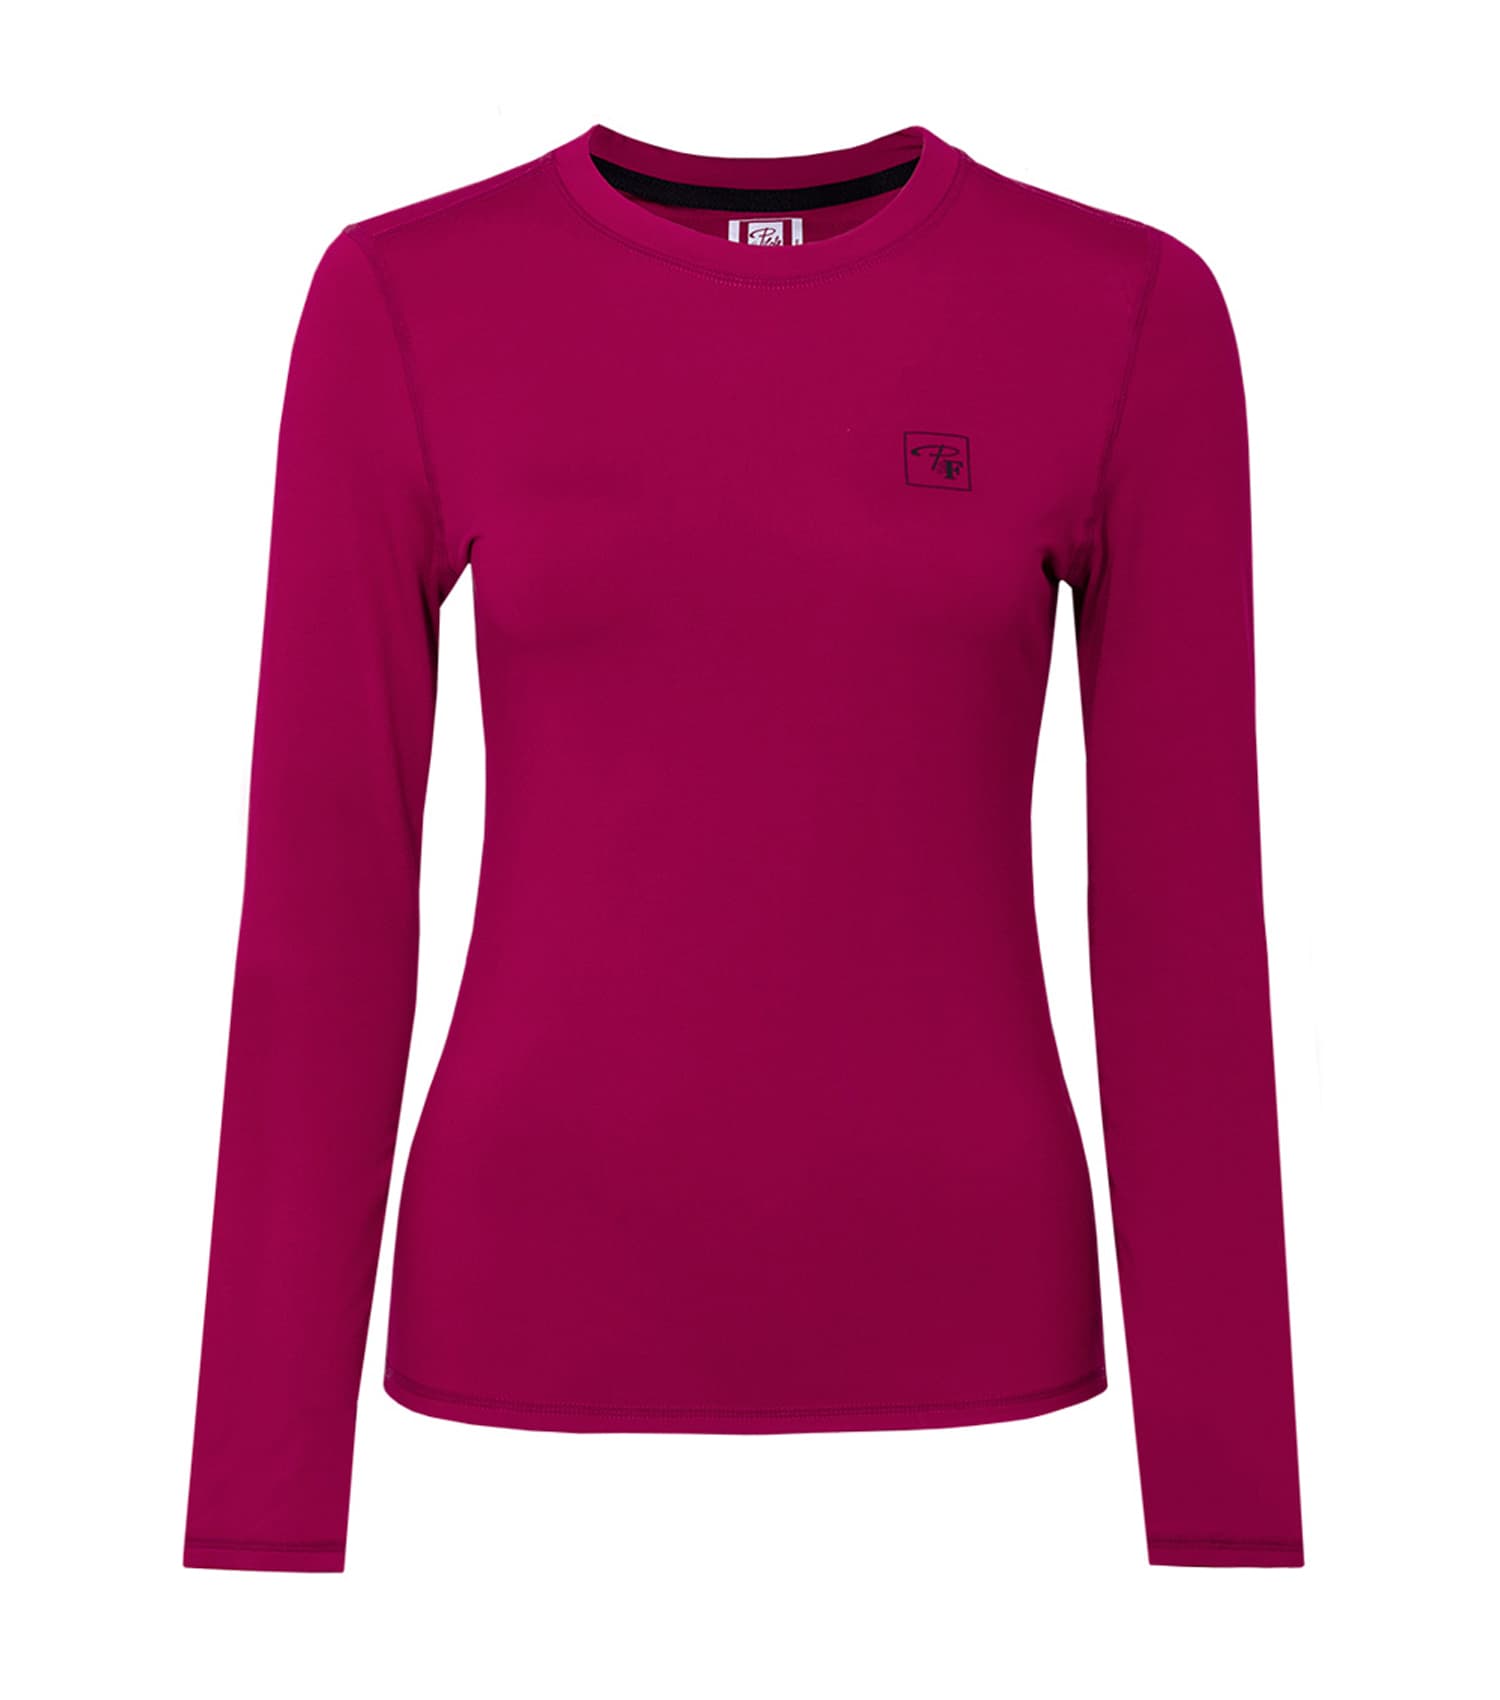 Women’s thermal shirt raspberry color